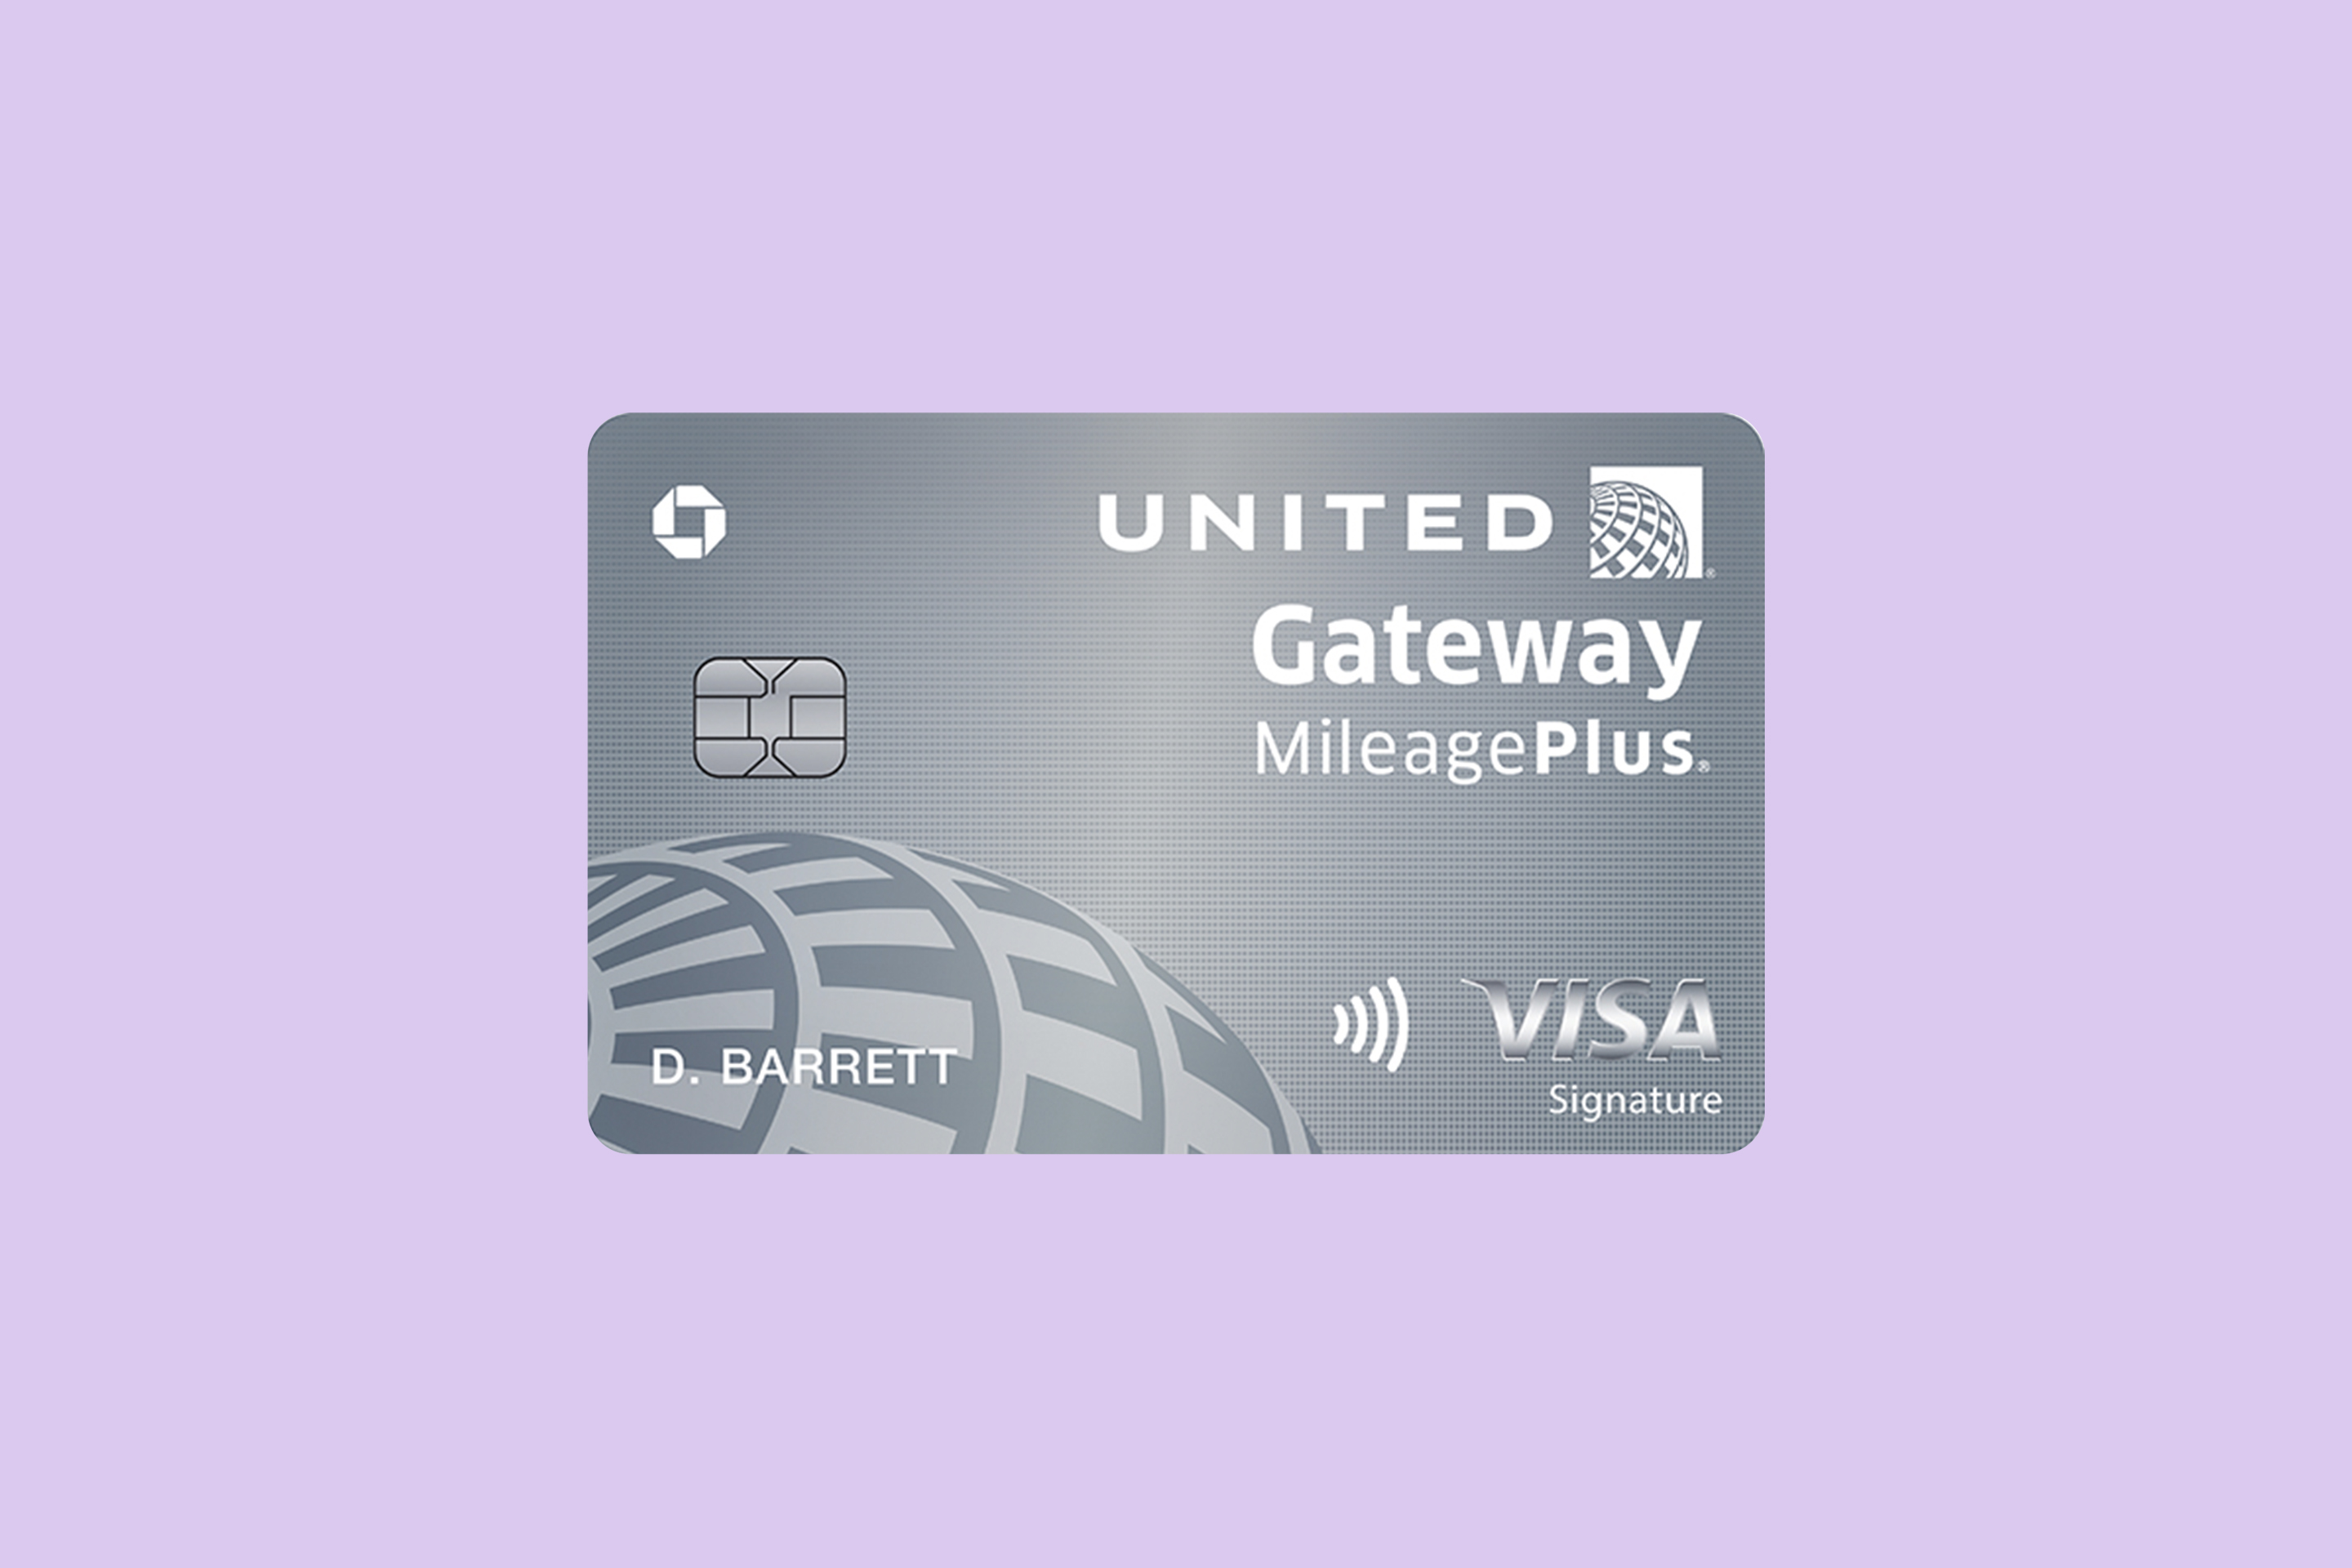 United Gateway Mileage Plus Credit Card by Chase